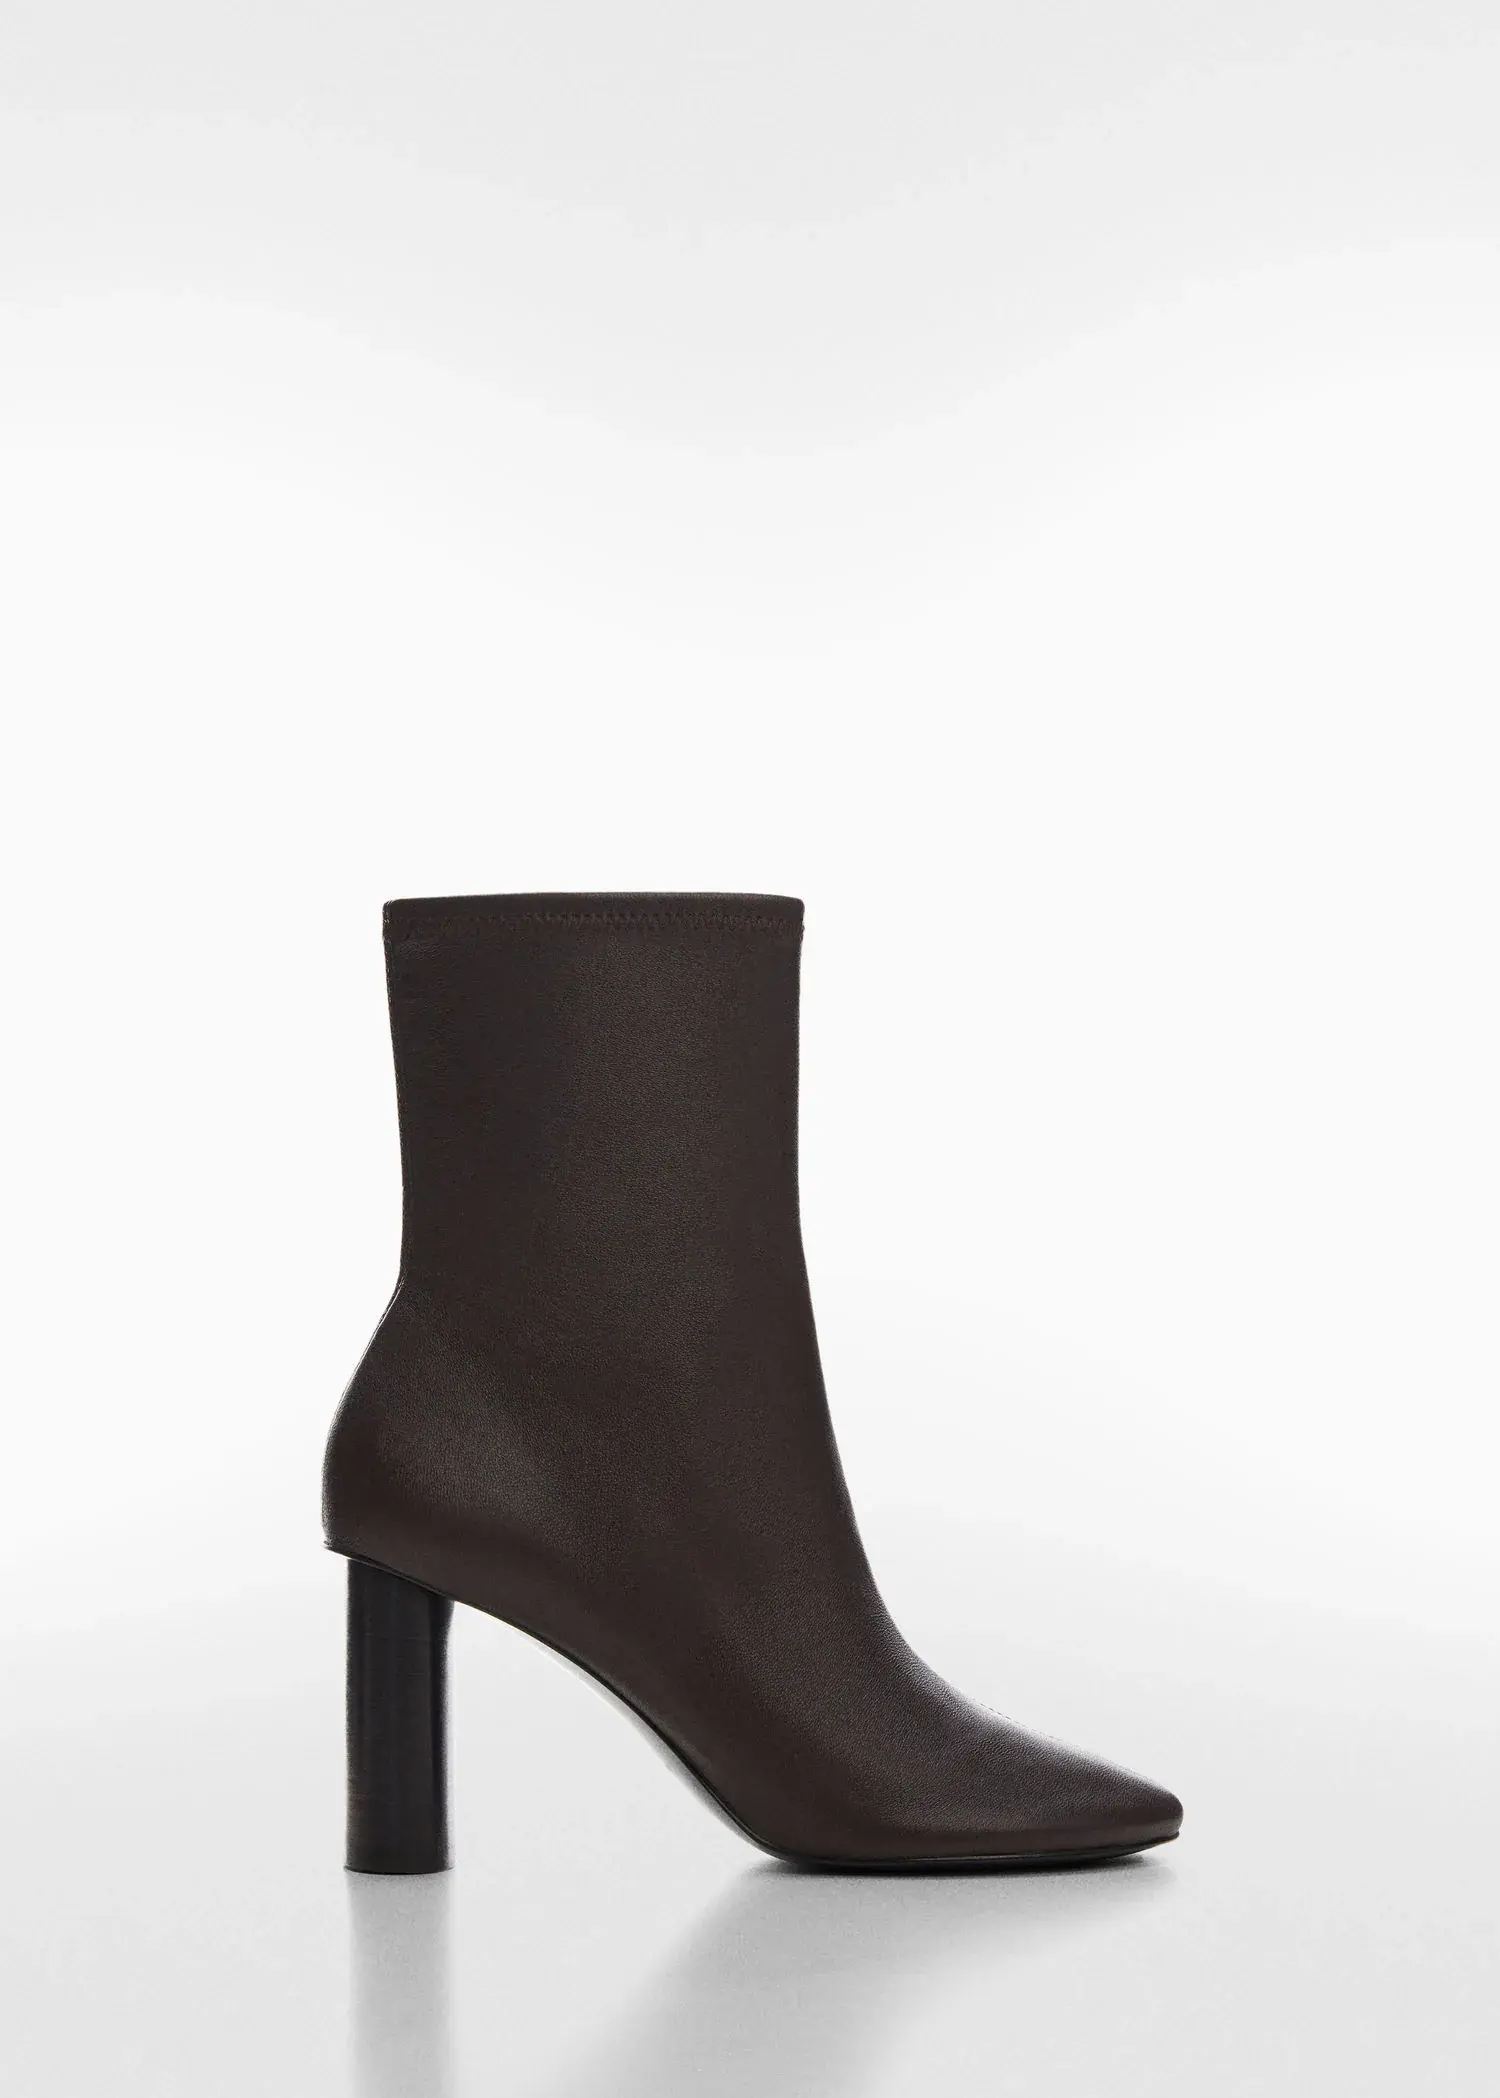 Mango Rounded toe leather ankle boots. 2